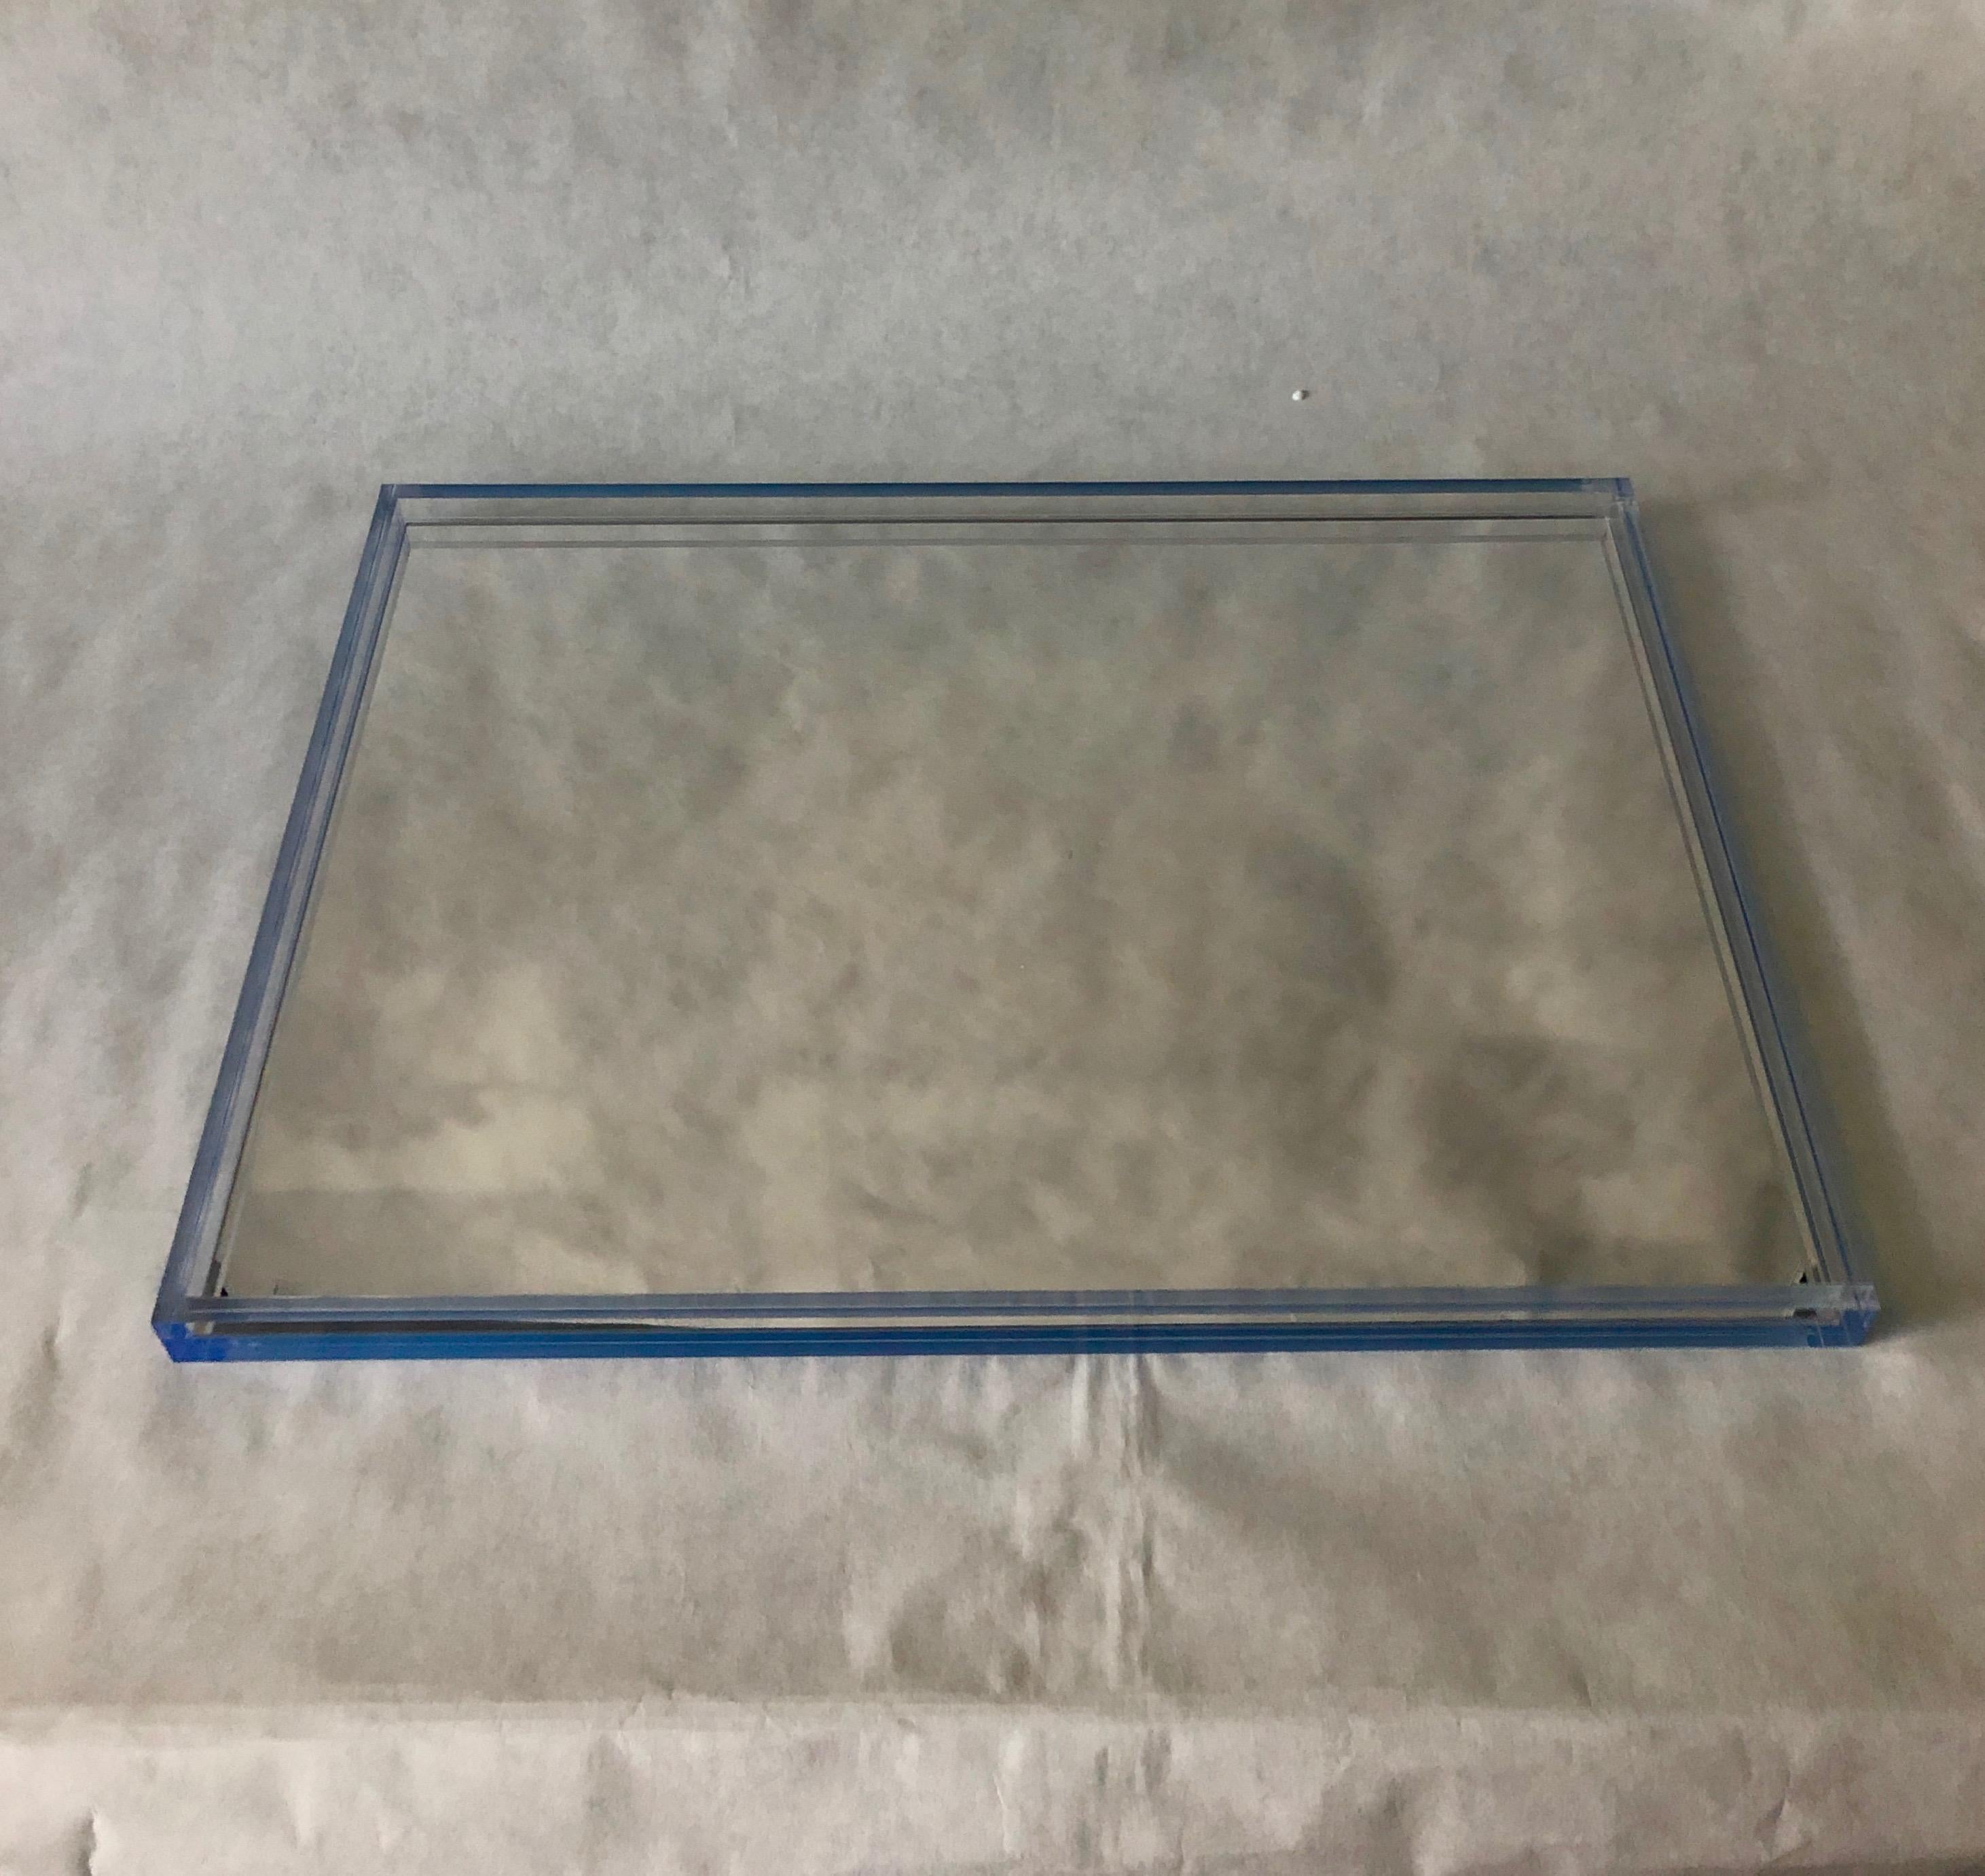 Offered is an early signed Tinsley Mortimer clear Lucite with Imbedded blue border and mirrored base Minimalist decorative barware / drinks / serving tray. The Lucite used in this design is substantial and quite exceptional. The blue accents to this